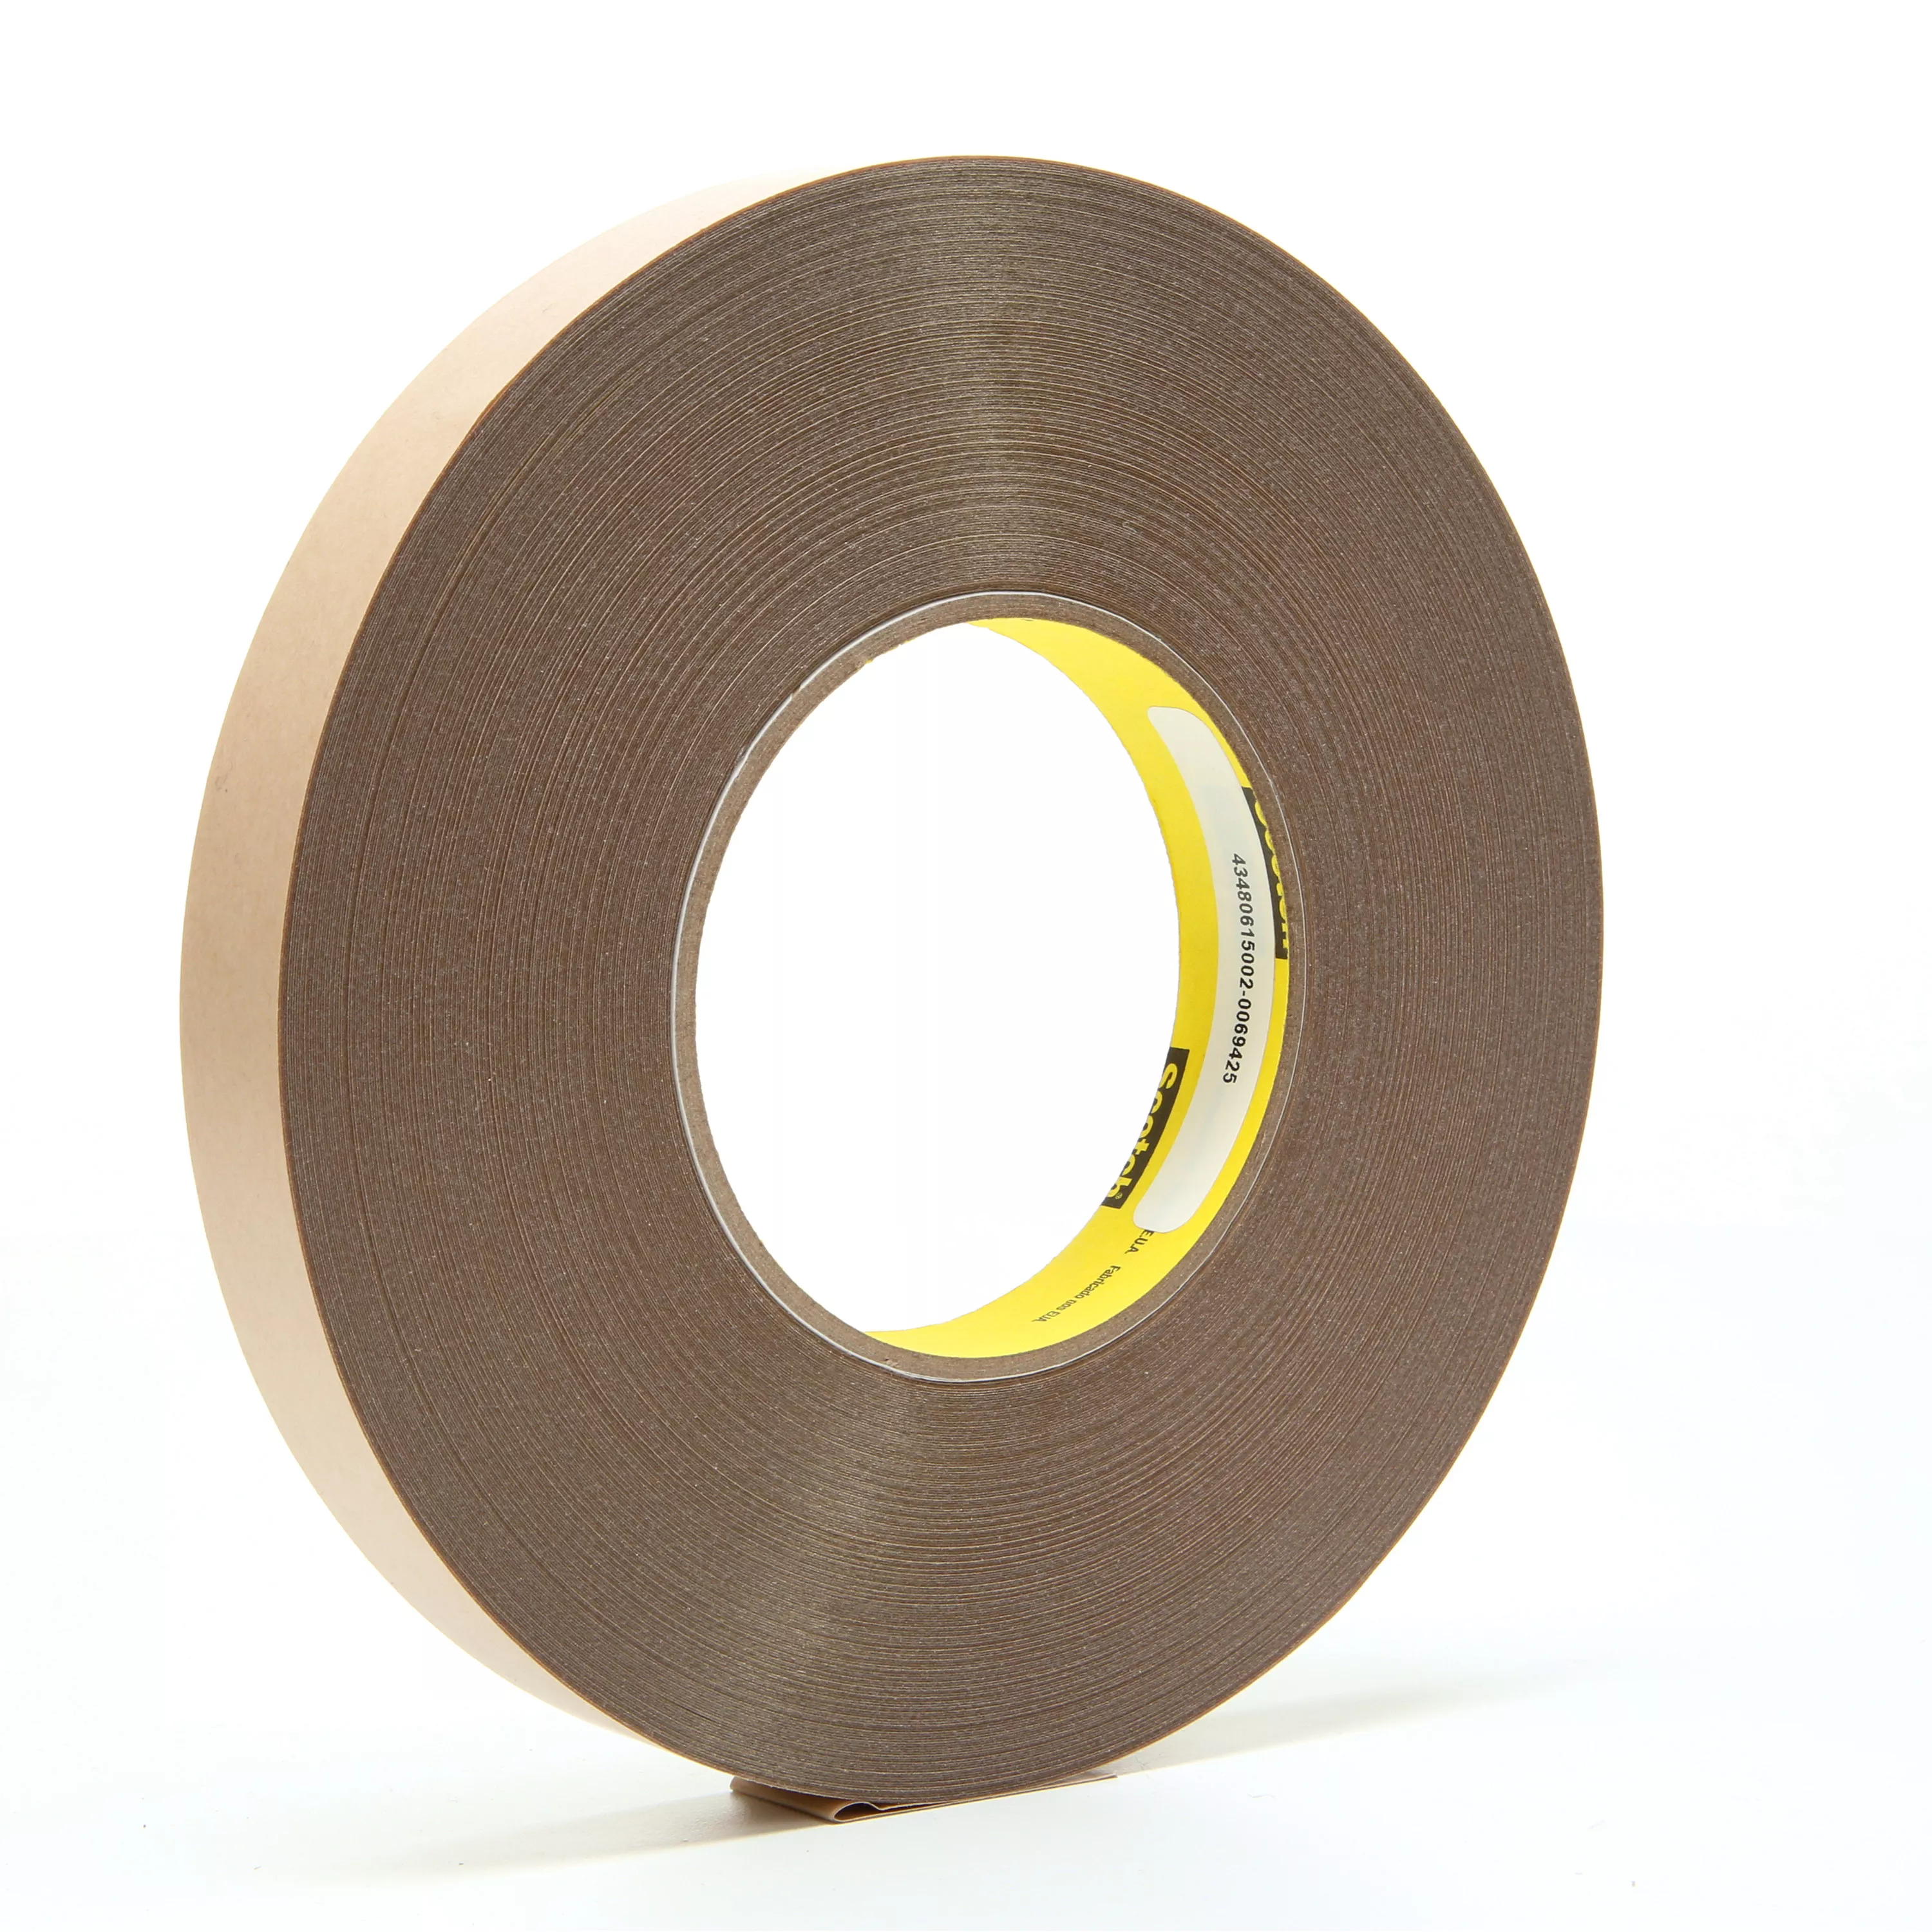 3M™ Removable Repositionable Tape 9425, Clear, 3/4 in x 72 yd, 5.8 mil,
12 Roll/Case